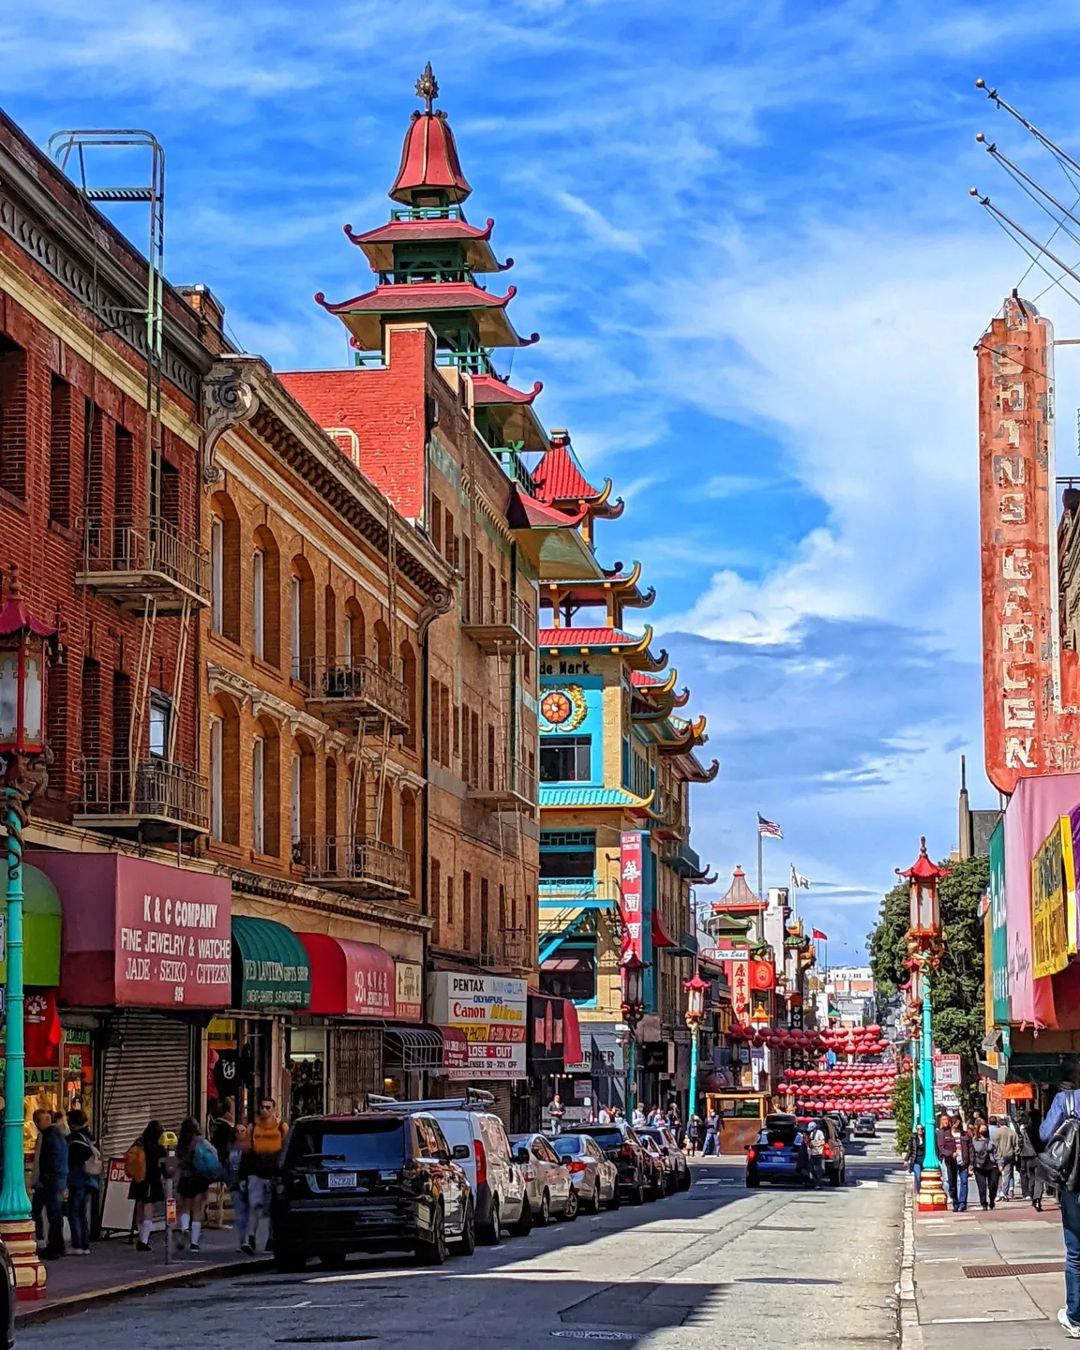 A view of buildings lining a street in San Francisco Chinatown. Photo by Instagram user @globallyjames